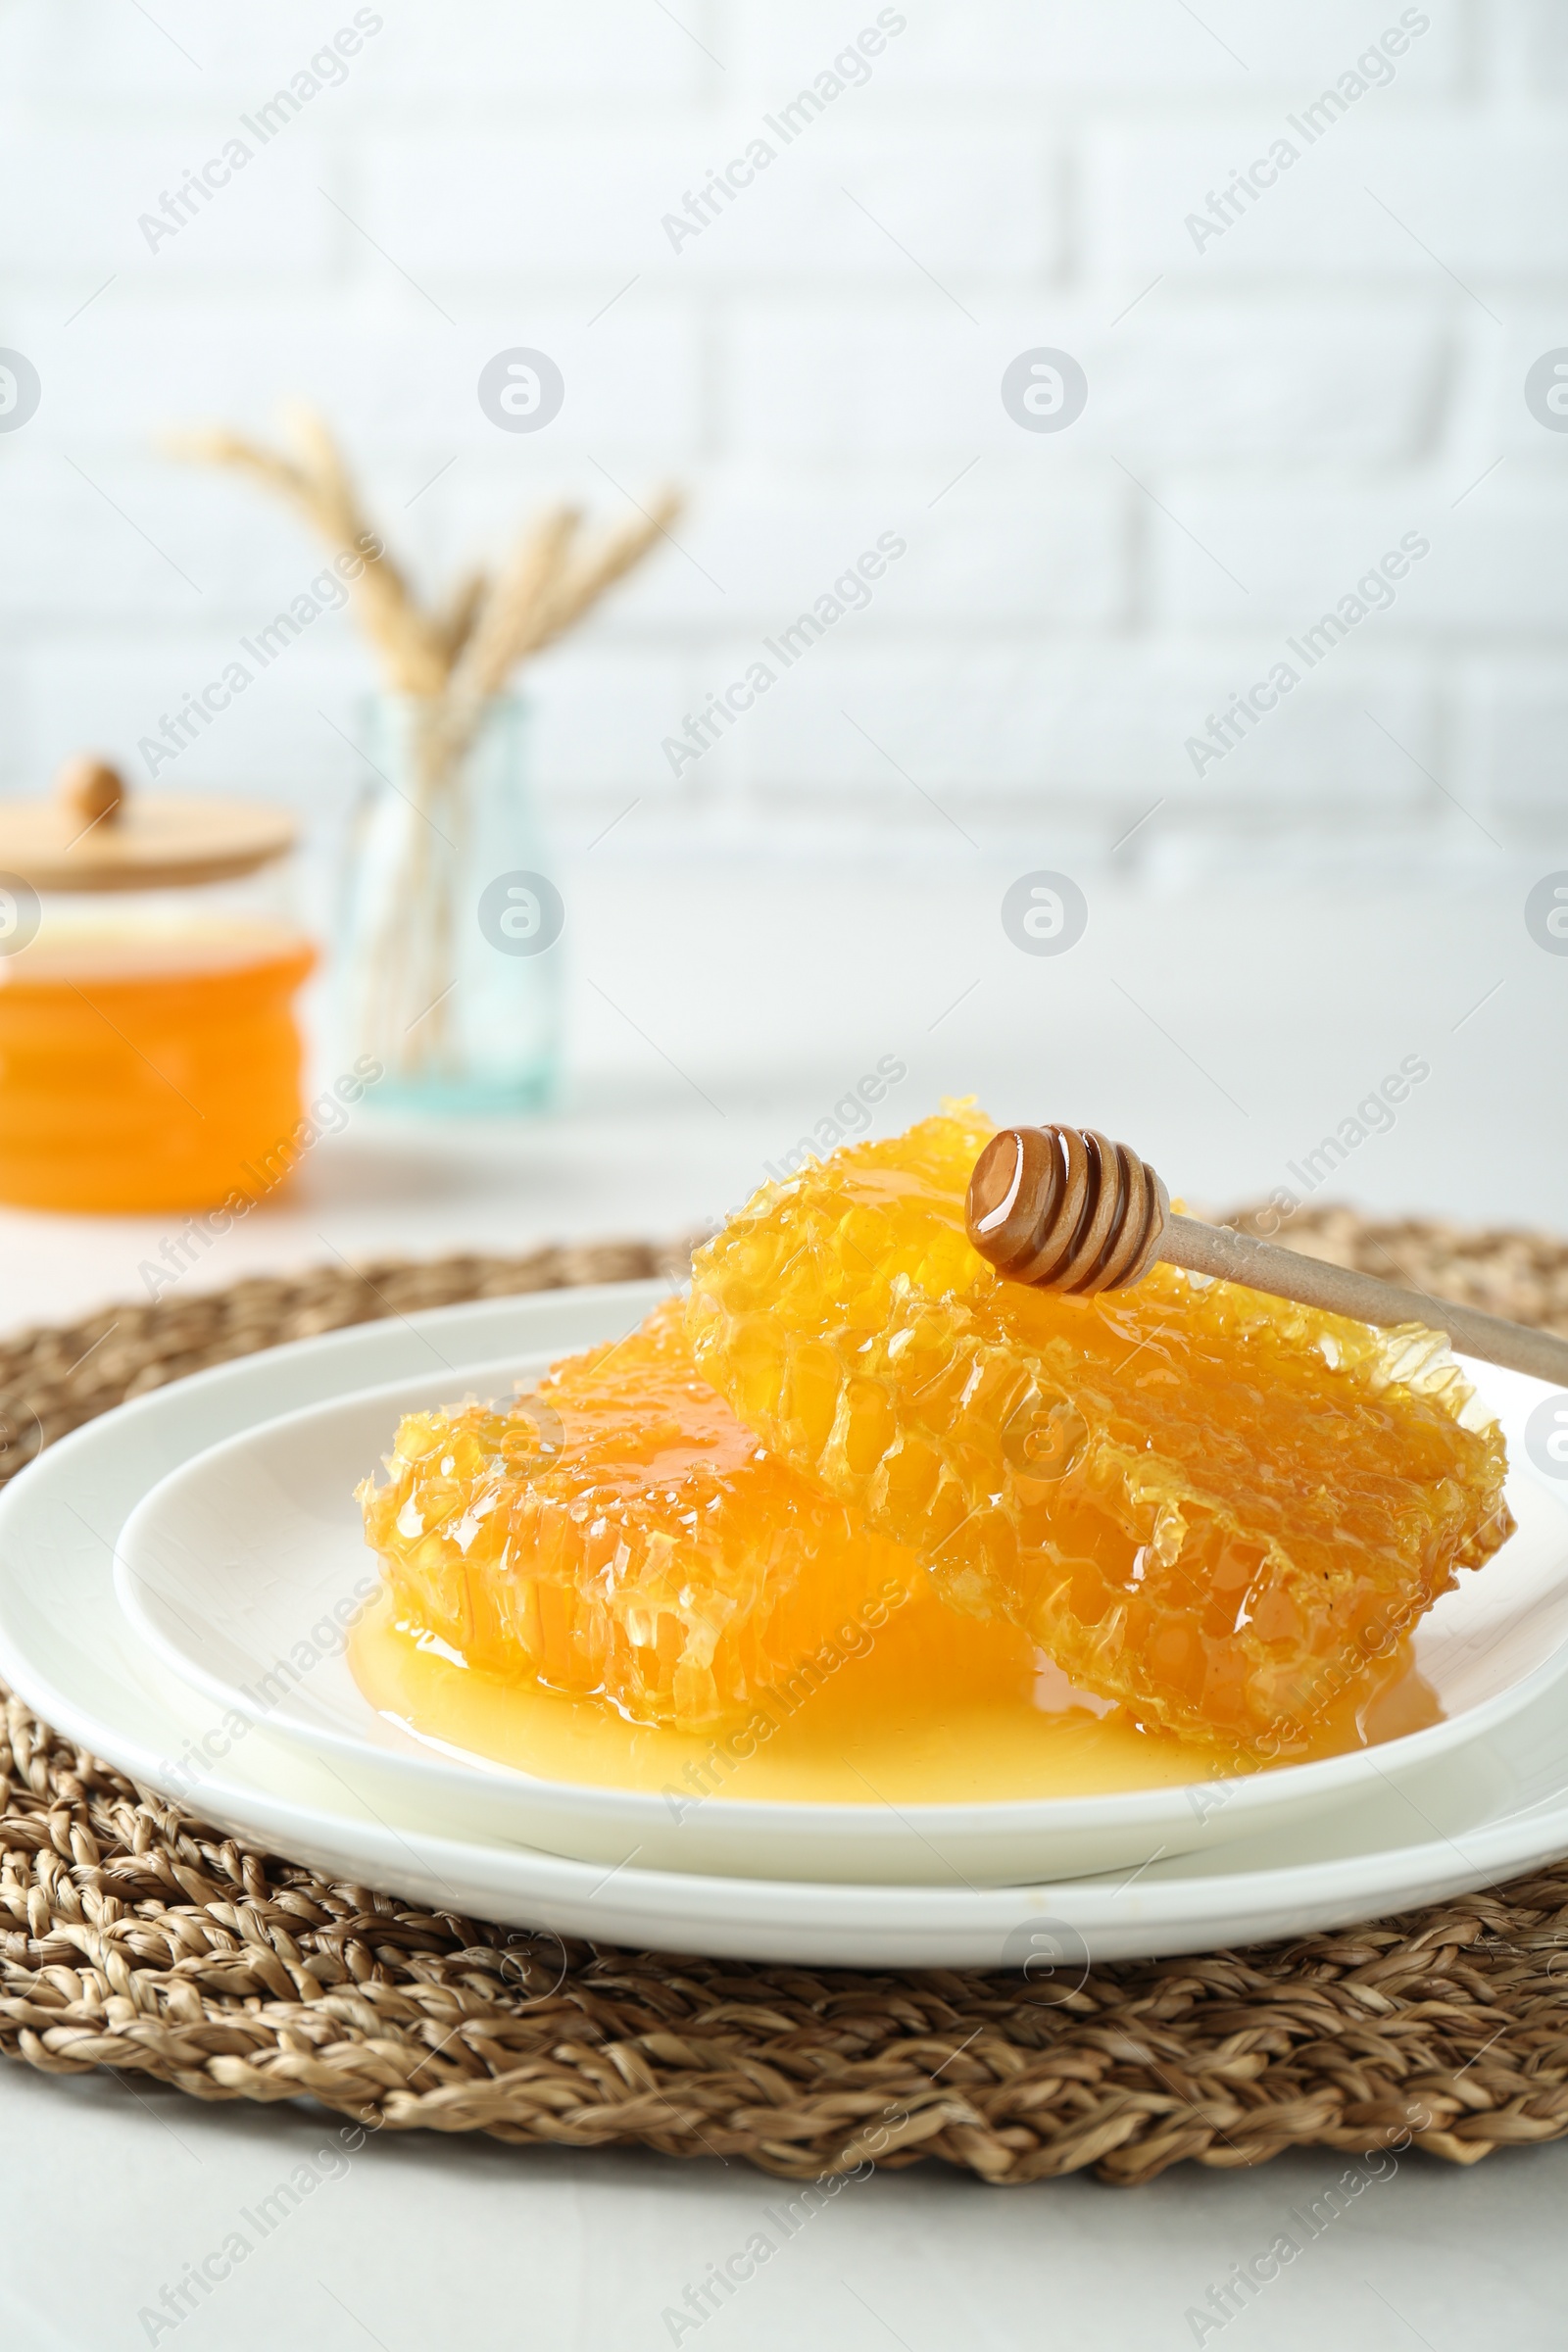 Photo of Natural honeycombs with tasty honey and dipper on white table